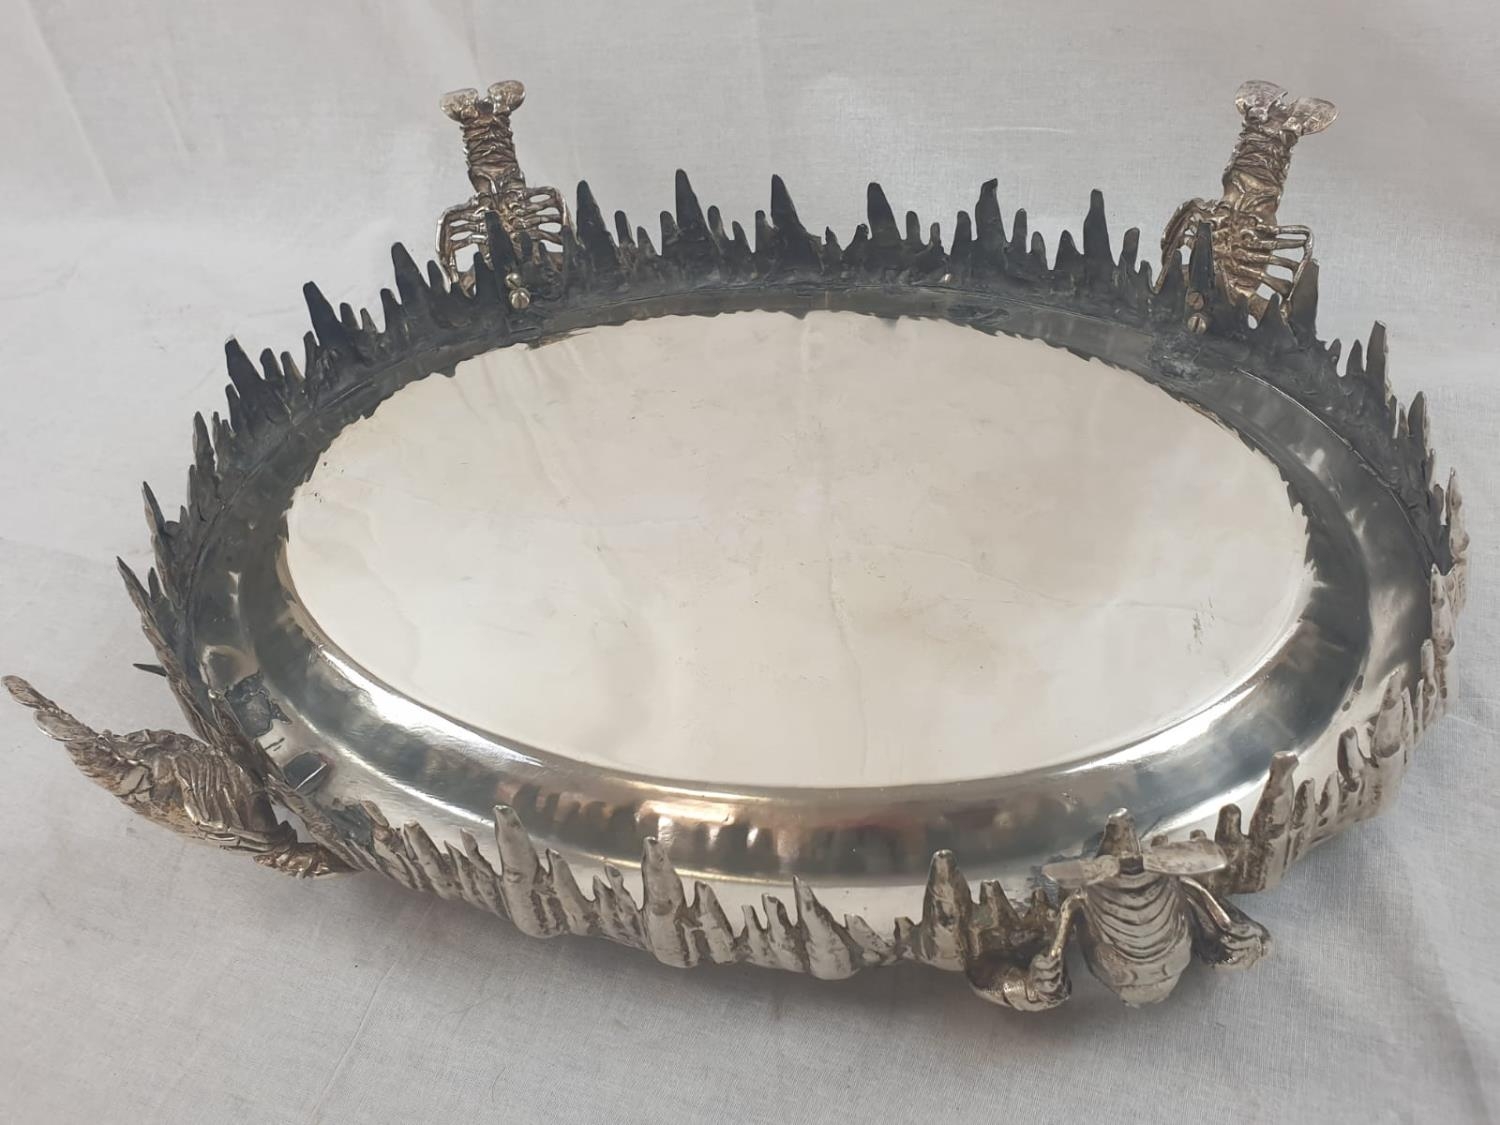 A VERY RARE SPANISH SILVER LOBSTER SERVING TRAY CIRCA 1920 , 4.2KG AND 50 X 35 CMS. AN INTERESTING - Bild 8 aus 10